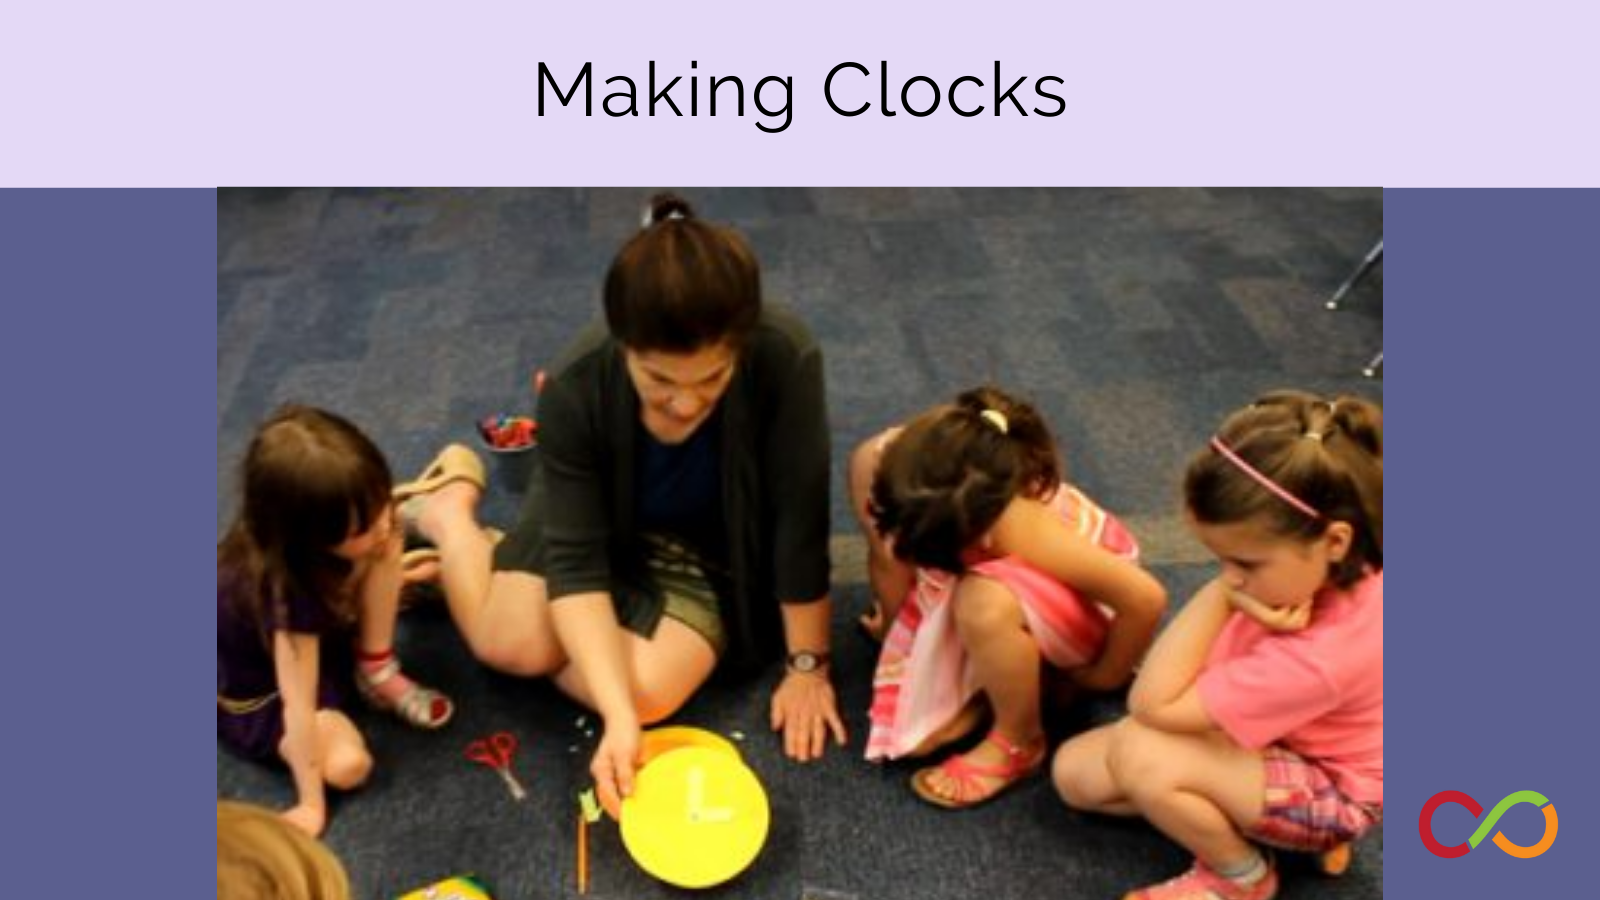 An image linking to the making clocks lesson